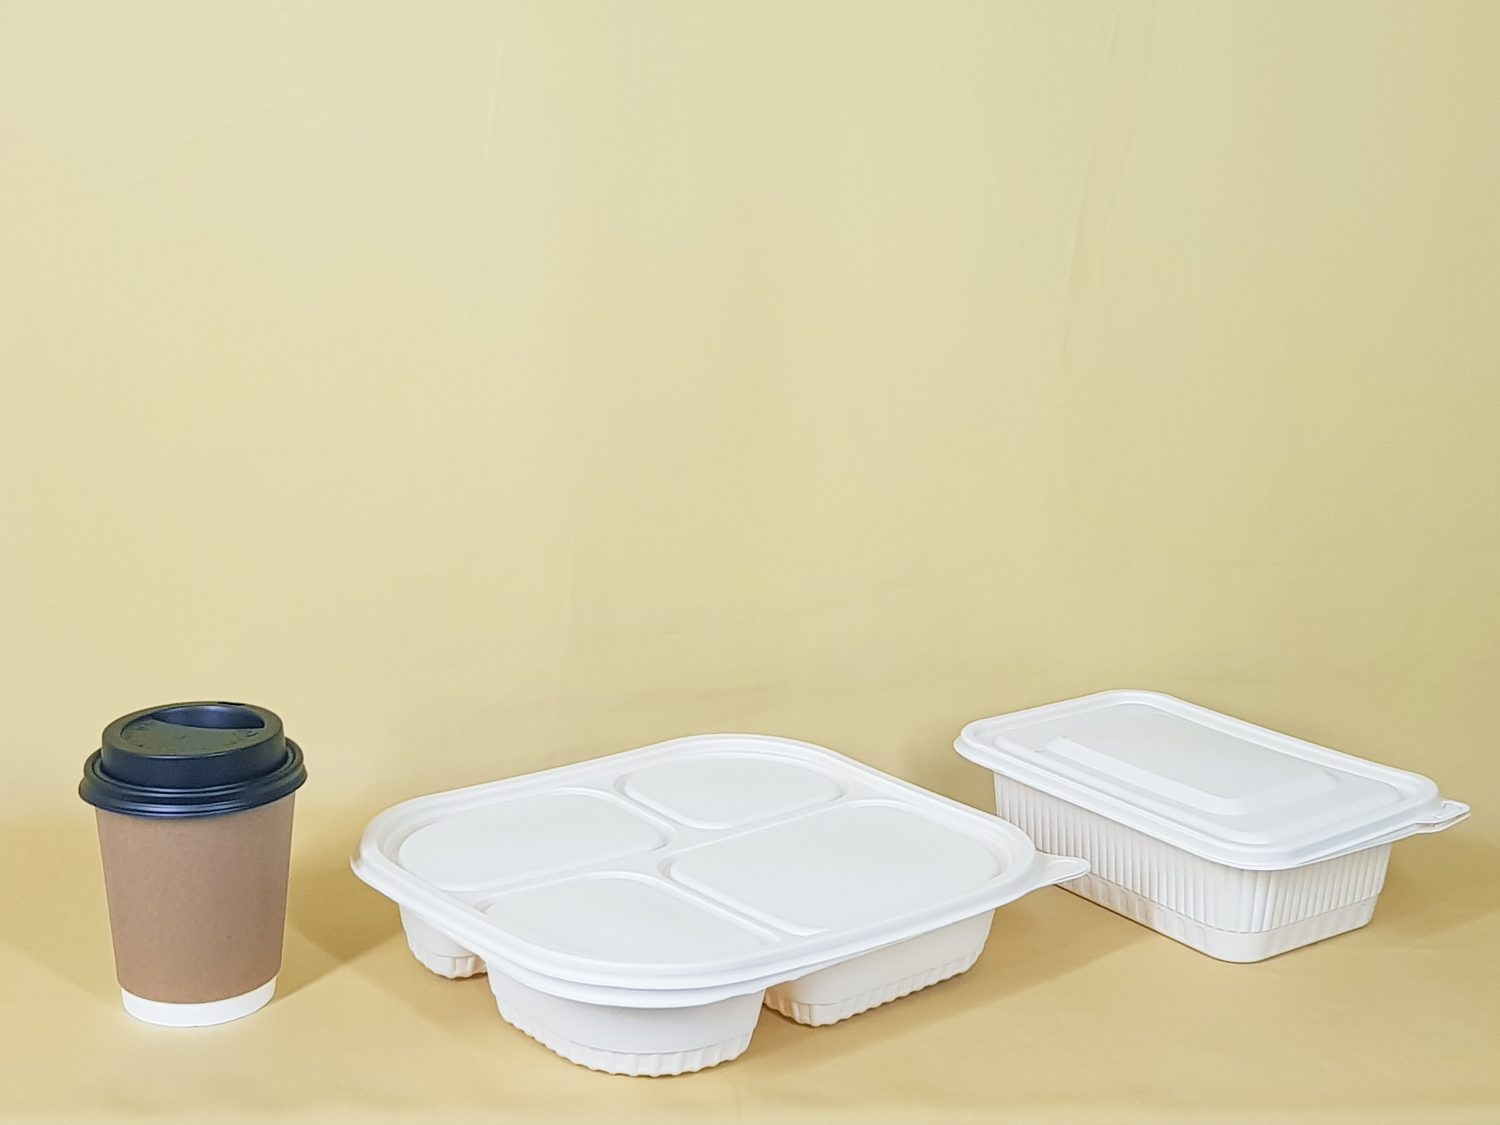 plastic-cup-and-food-containers